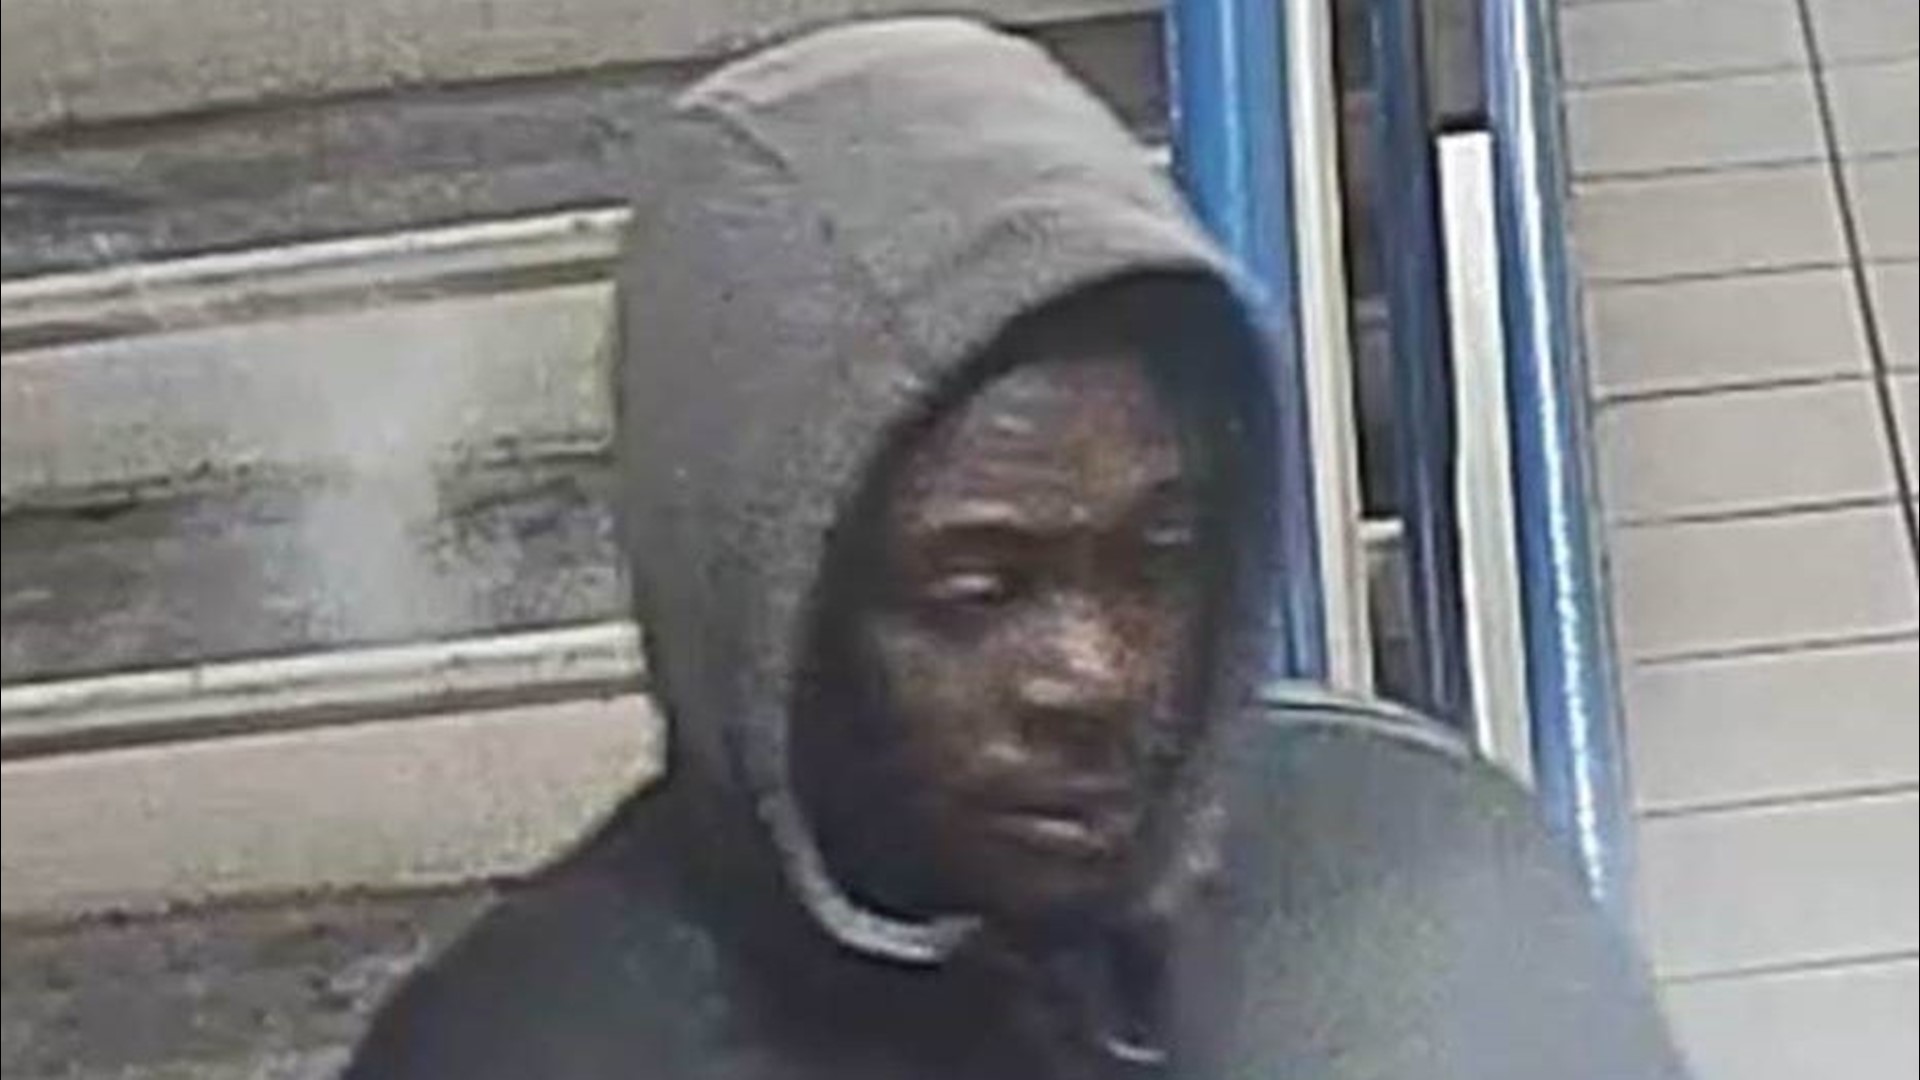 Police are looking for a man who they say pulled a gun on a victim and demanded money.